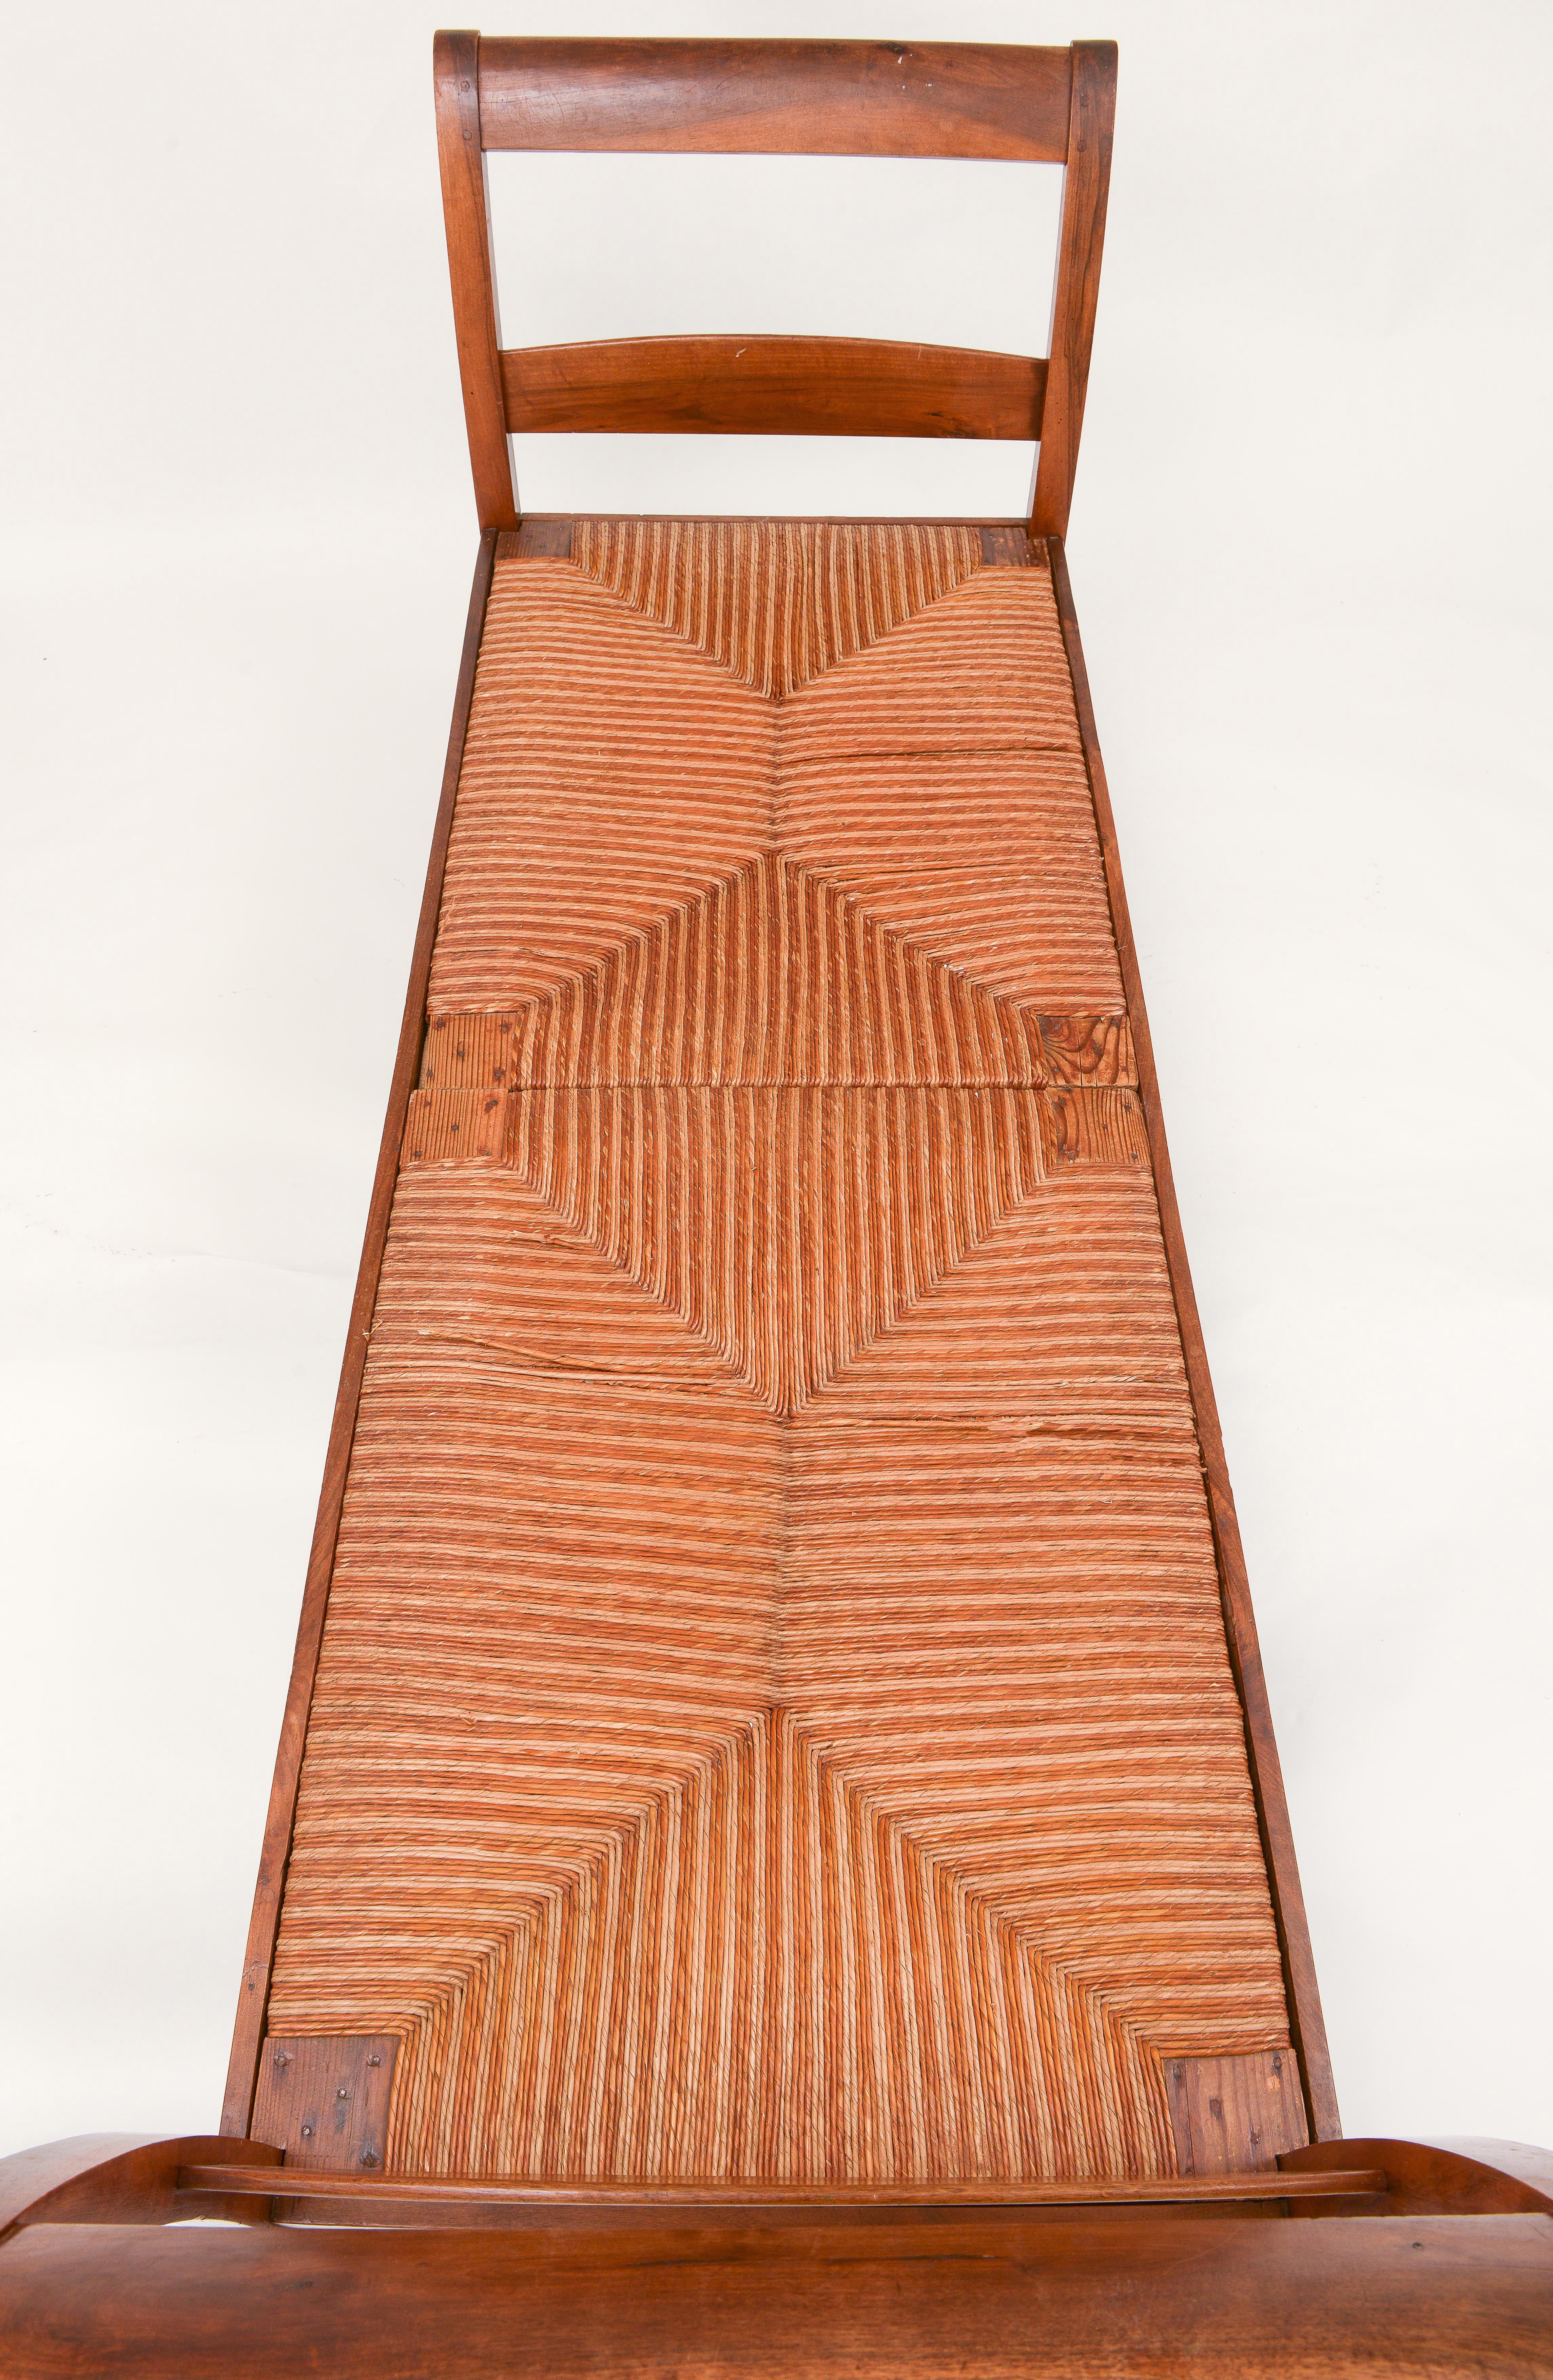 French Wood Woven Wicker Large Bench, Daybed, Imported from France, 1950's